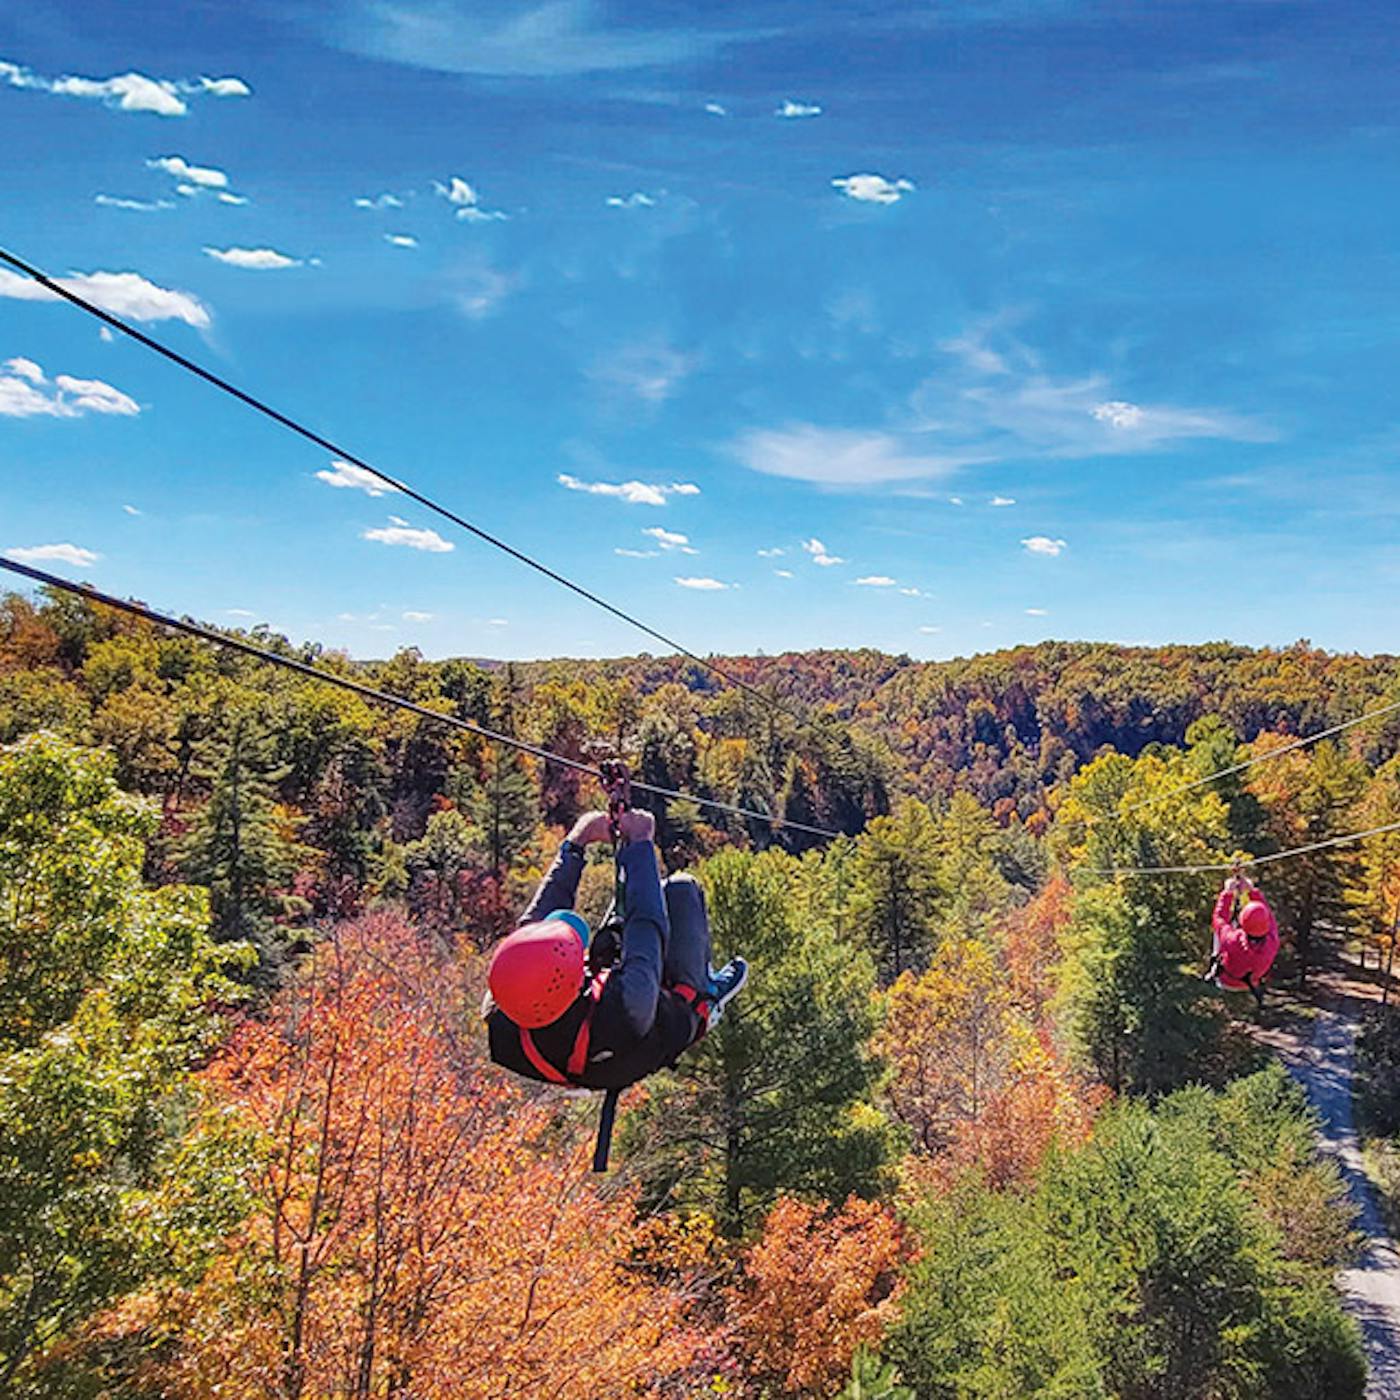 People zip lining at Red River Gorge Ziplines in Campton, Kentucky (photo courtesy of Red River Gorge Ziplines))